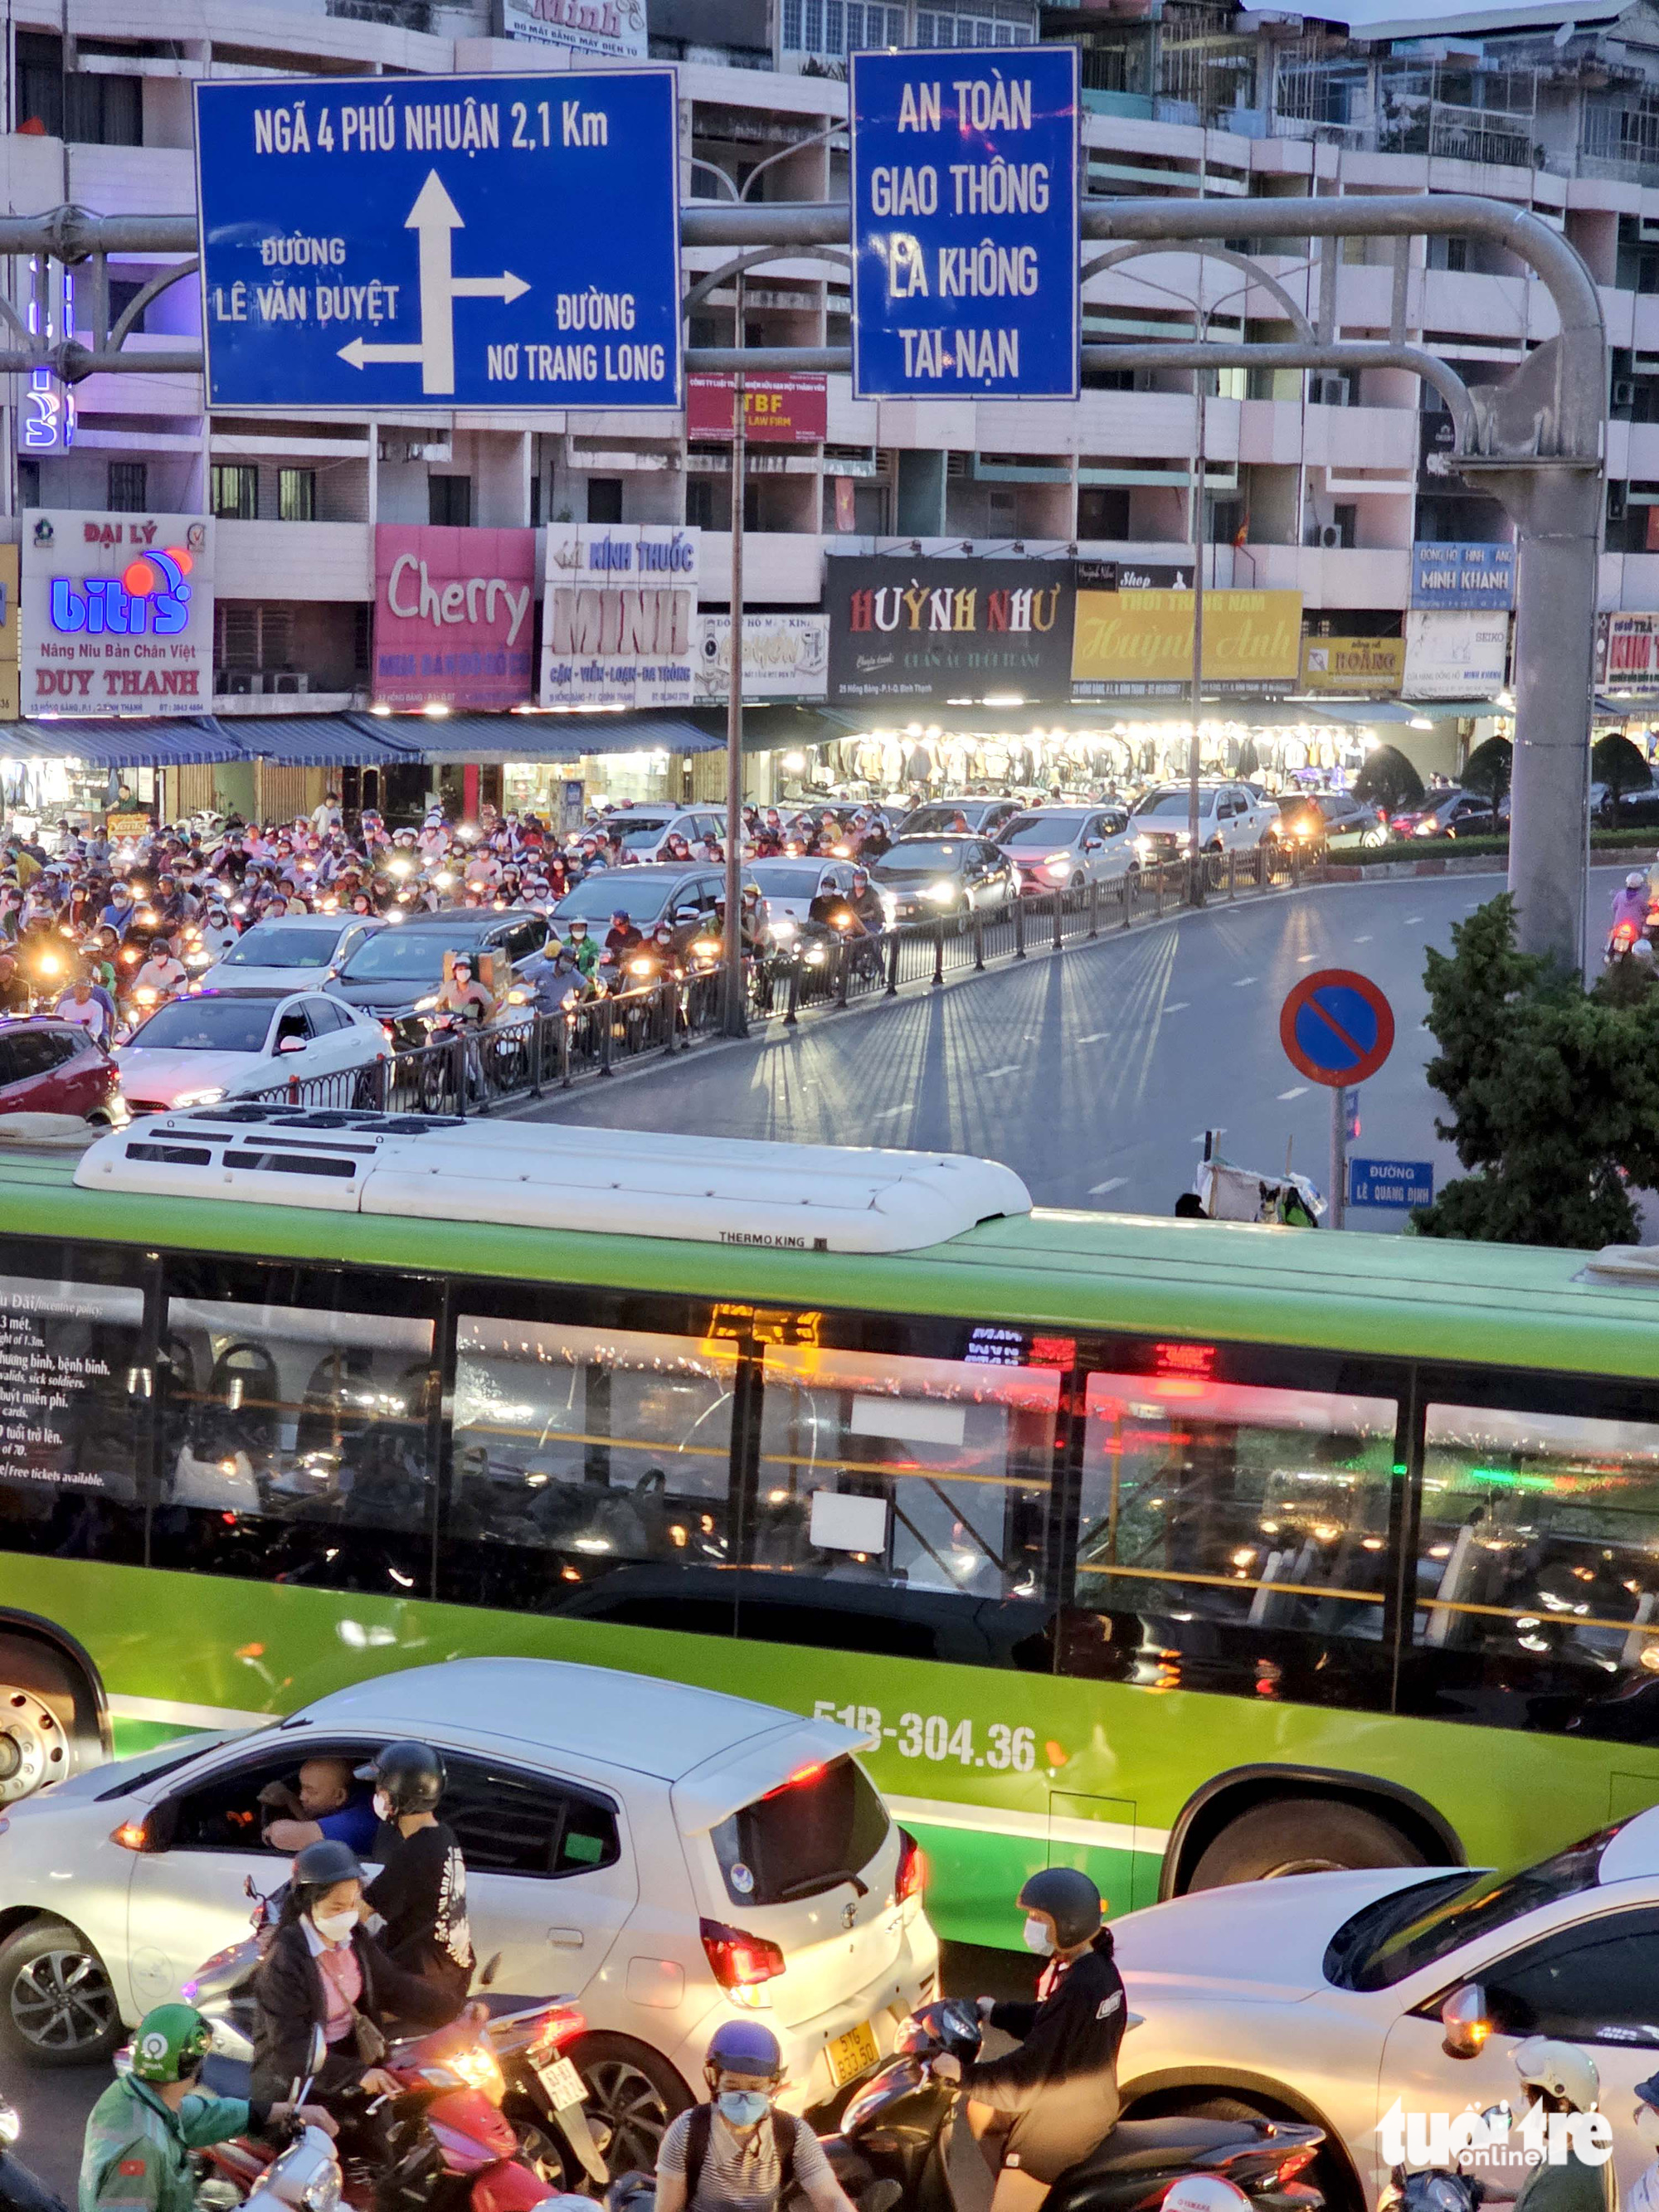 Traffic congestion occurs in front of Ba Chieu Market in Binh Thanh District, Ho Chi Minh City, May 12, 2023. Photo: Hieu Giang / Tuoi Tre